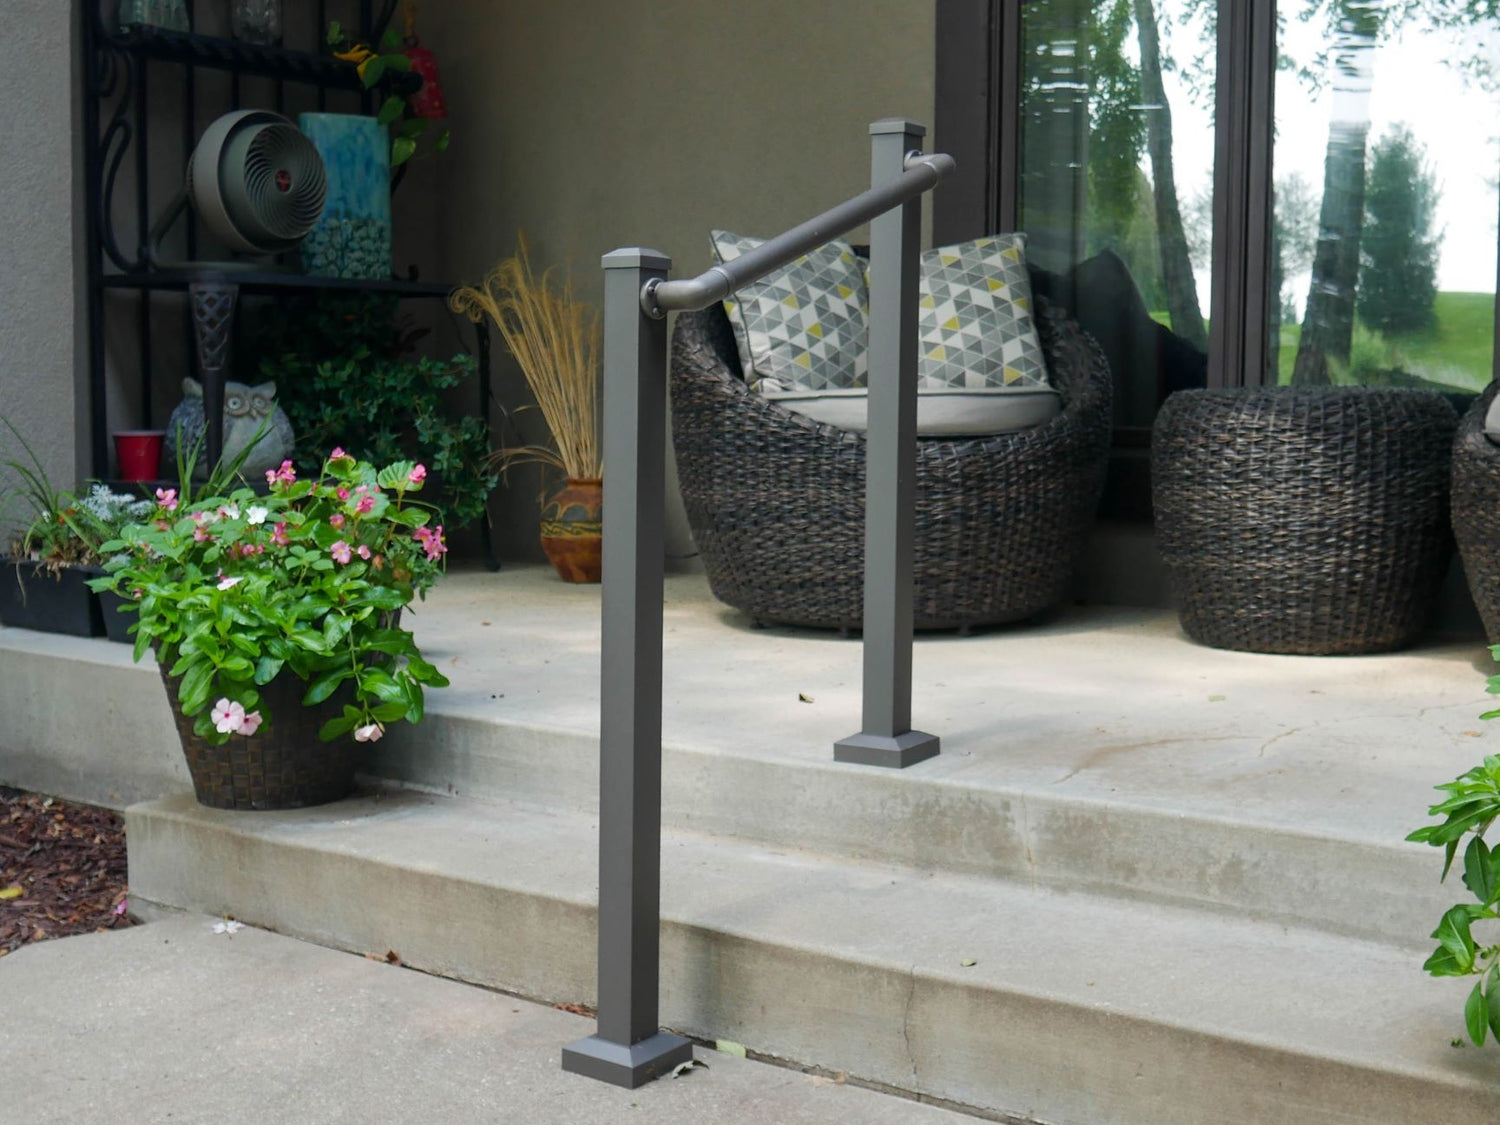 Bronze Continuous handrail helps people step up stairs, and is easy to install!!